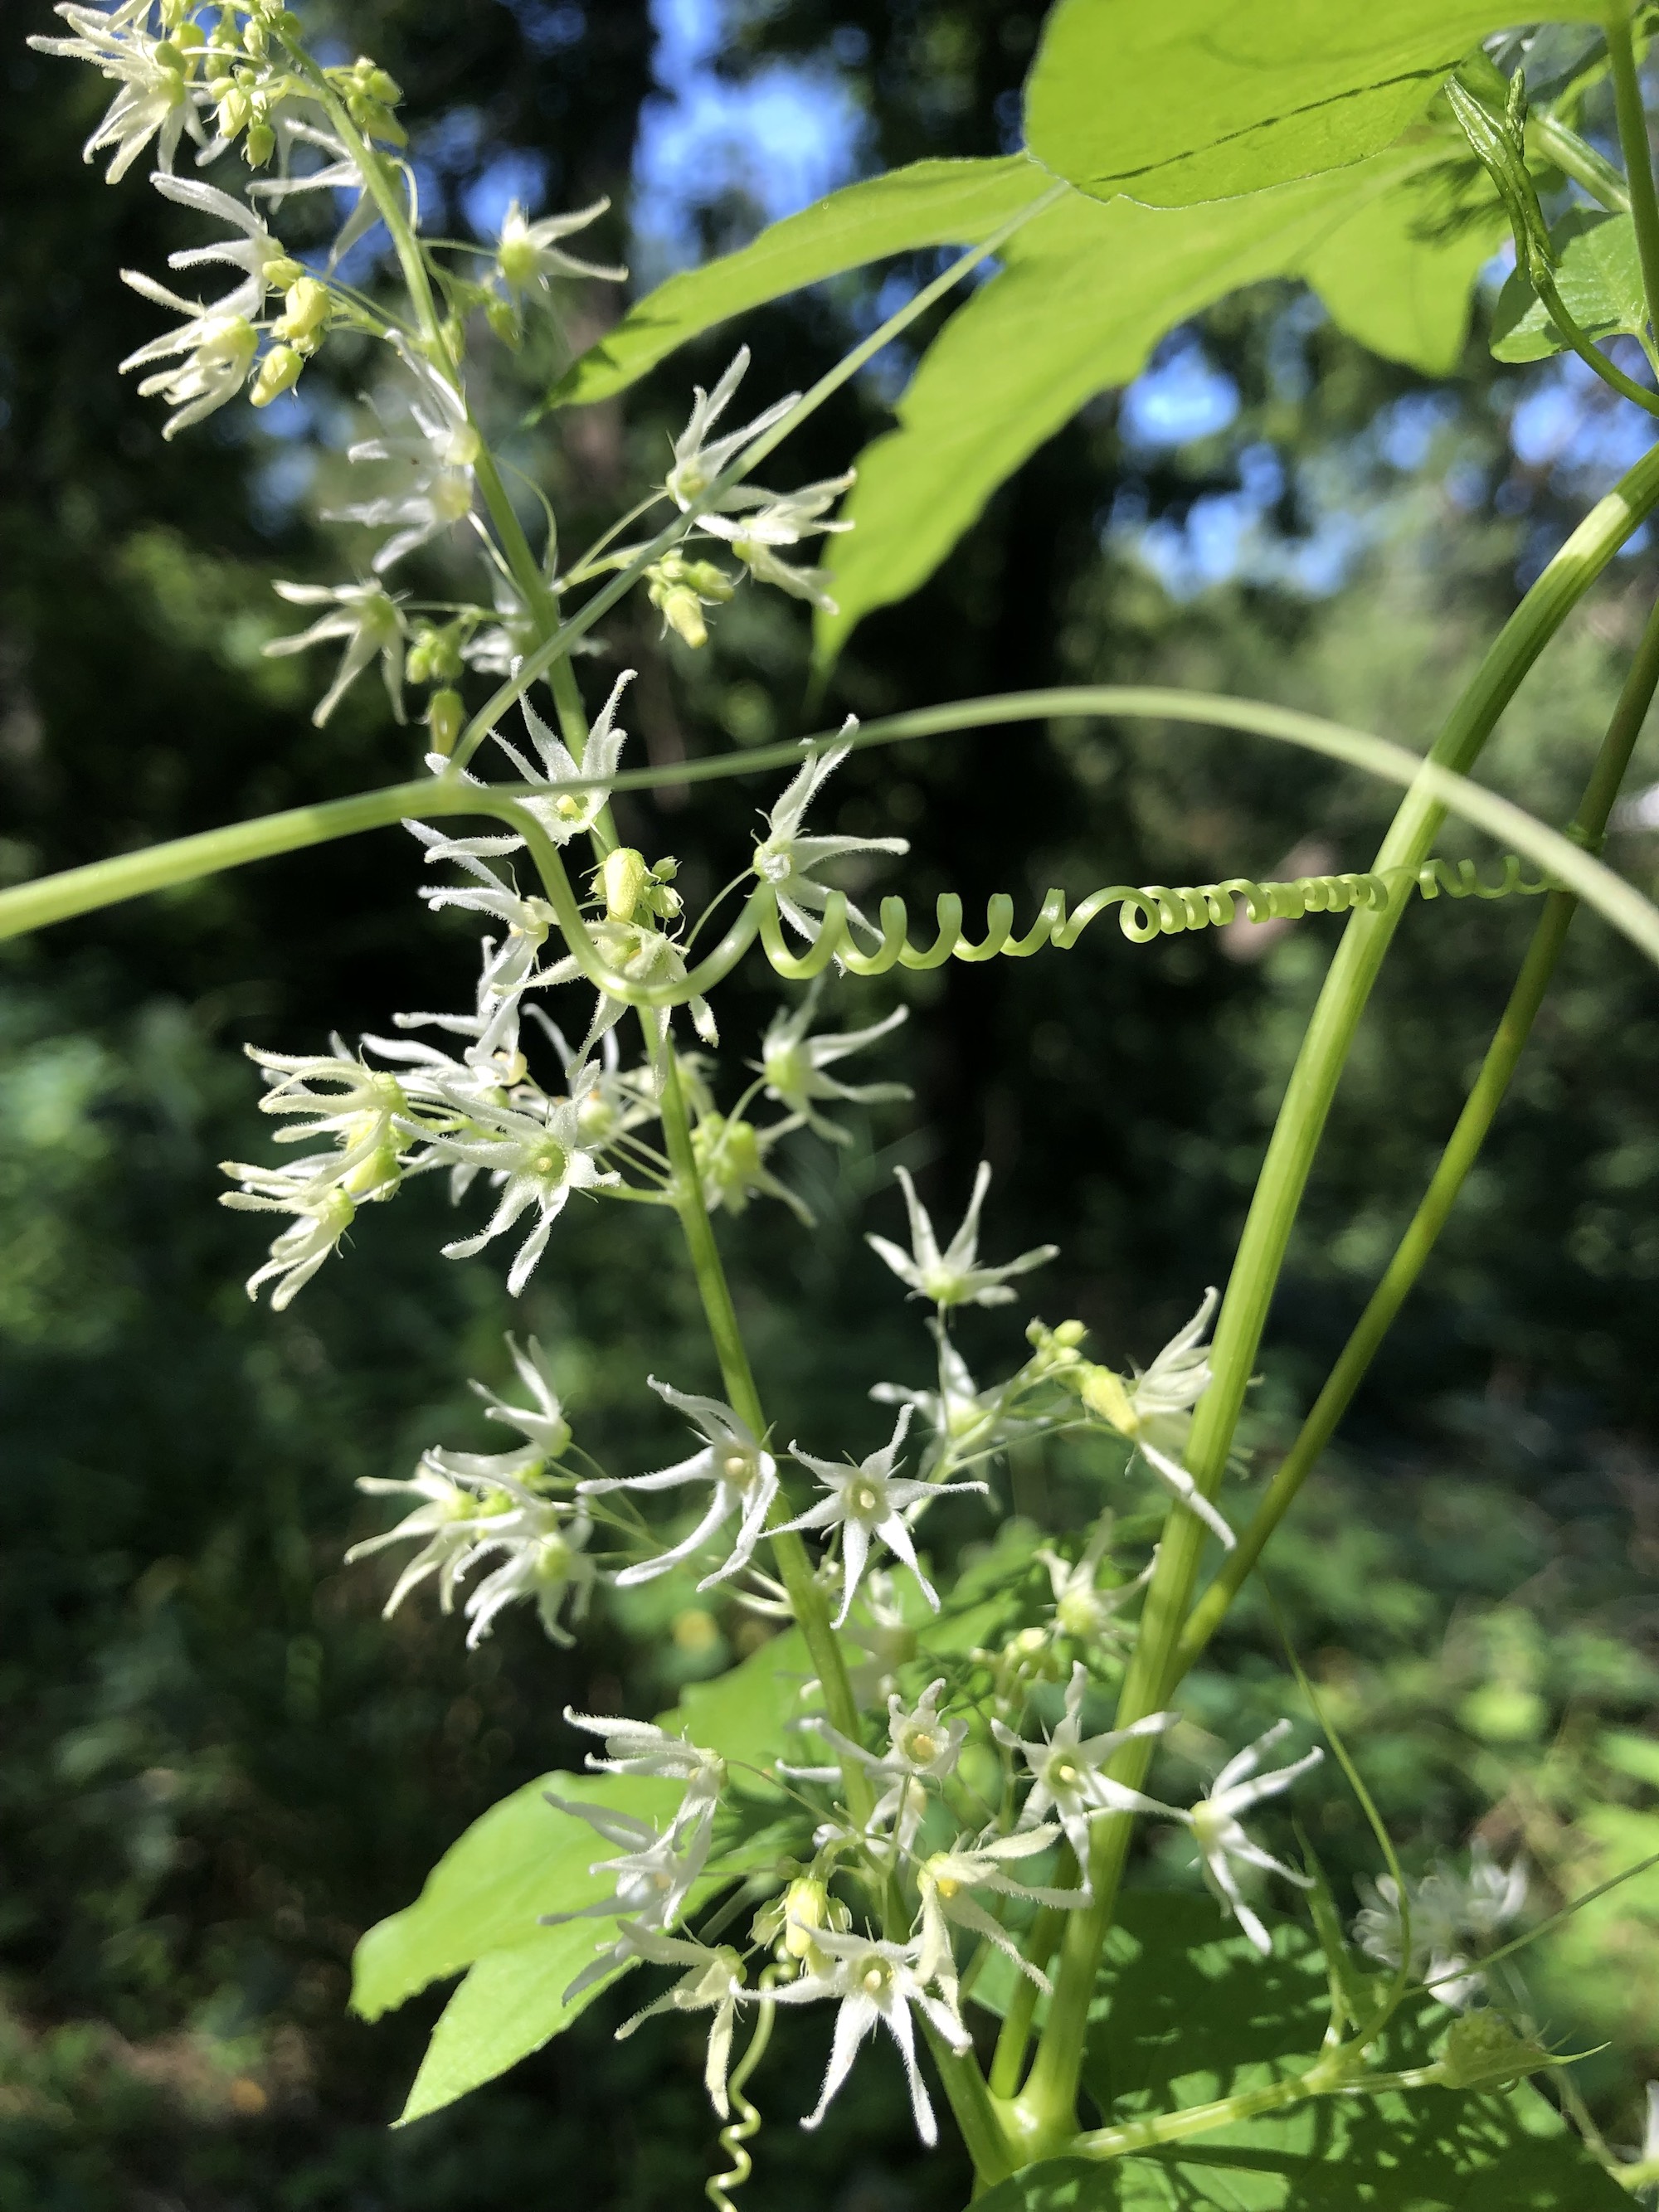 Wild Cucumber off of bike path behind Gregory Street in Madison, Wisconsin on August 13, 2021.